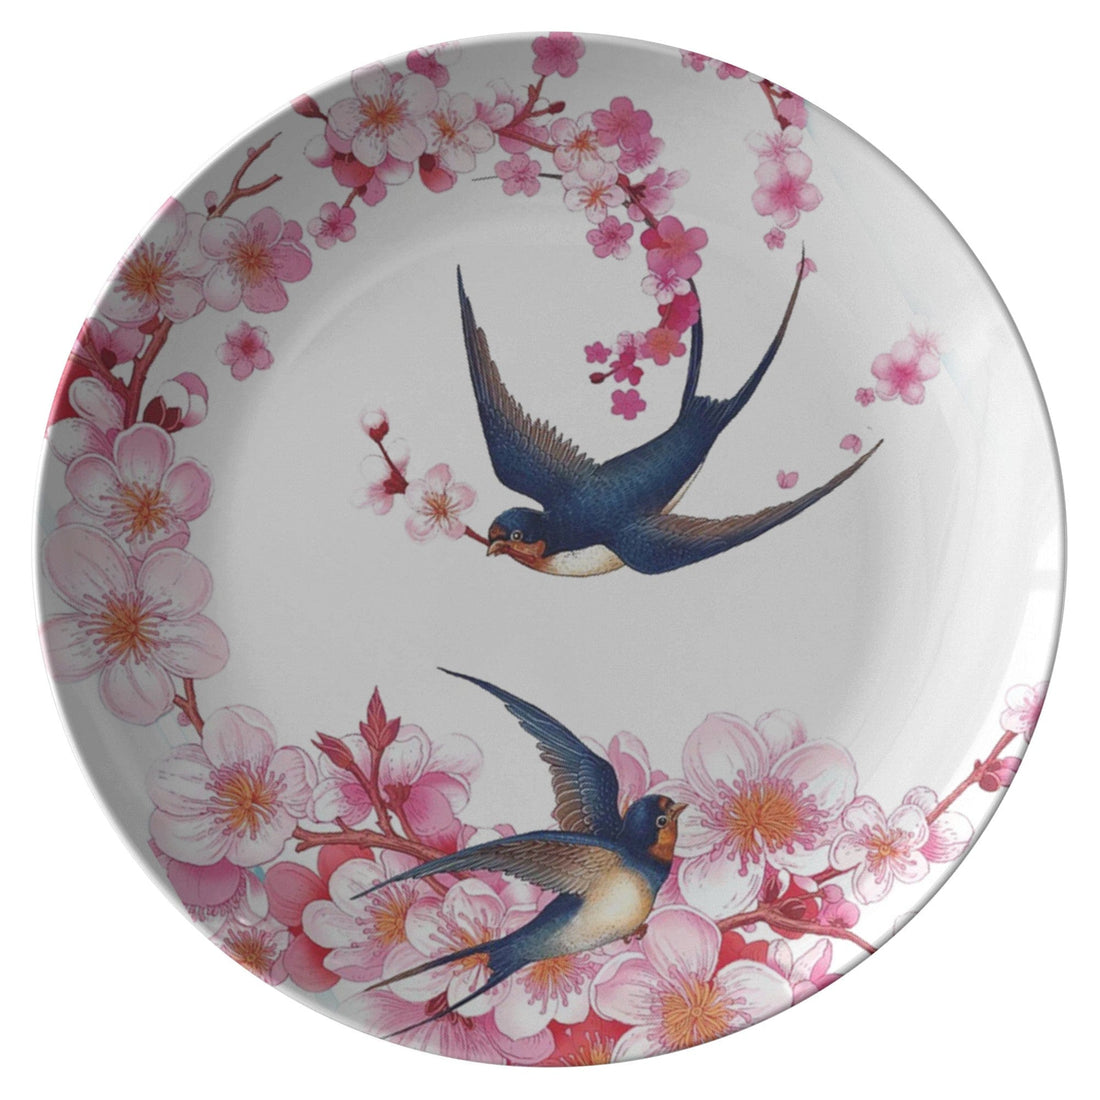 Kate McEnroe New York Swallows in Pink Cherry Blossoms Dinner Plate Plates Set of Four P20-SWA-CBL-B4